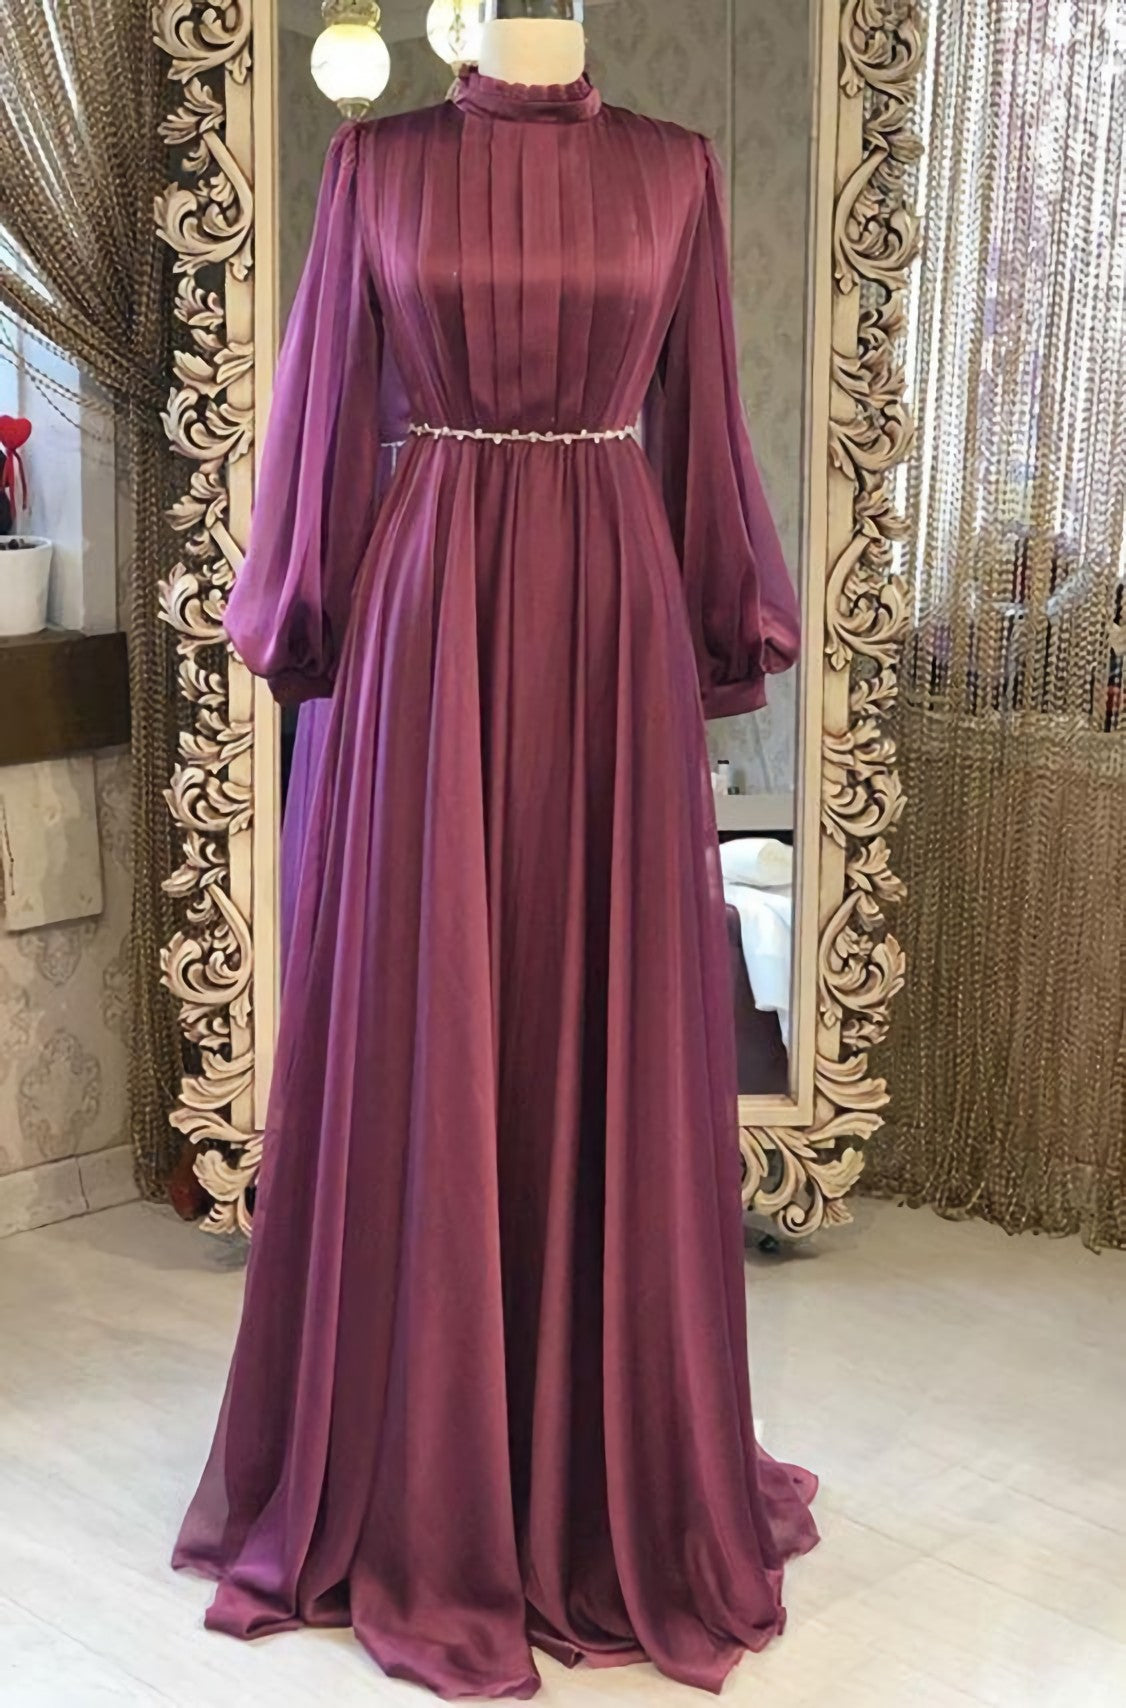 Chiffon Long Sleeves High Neck Fashion Corset Prom Dress outfits, Evening Dresses Prom